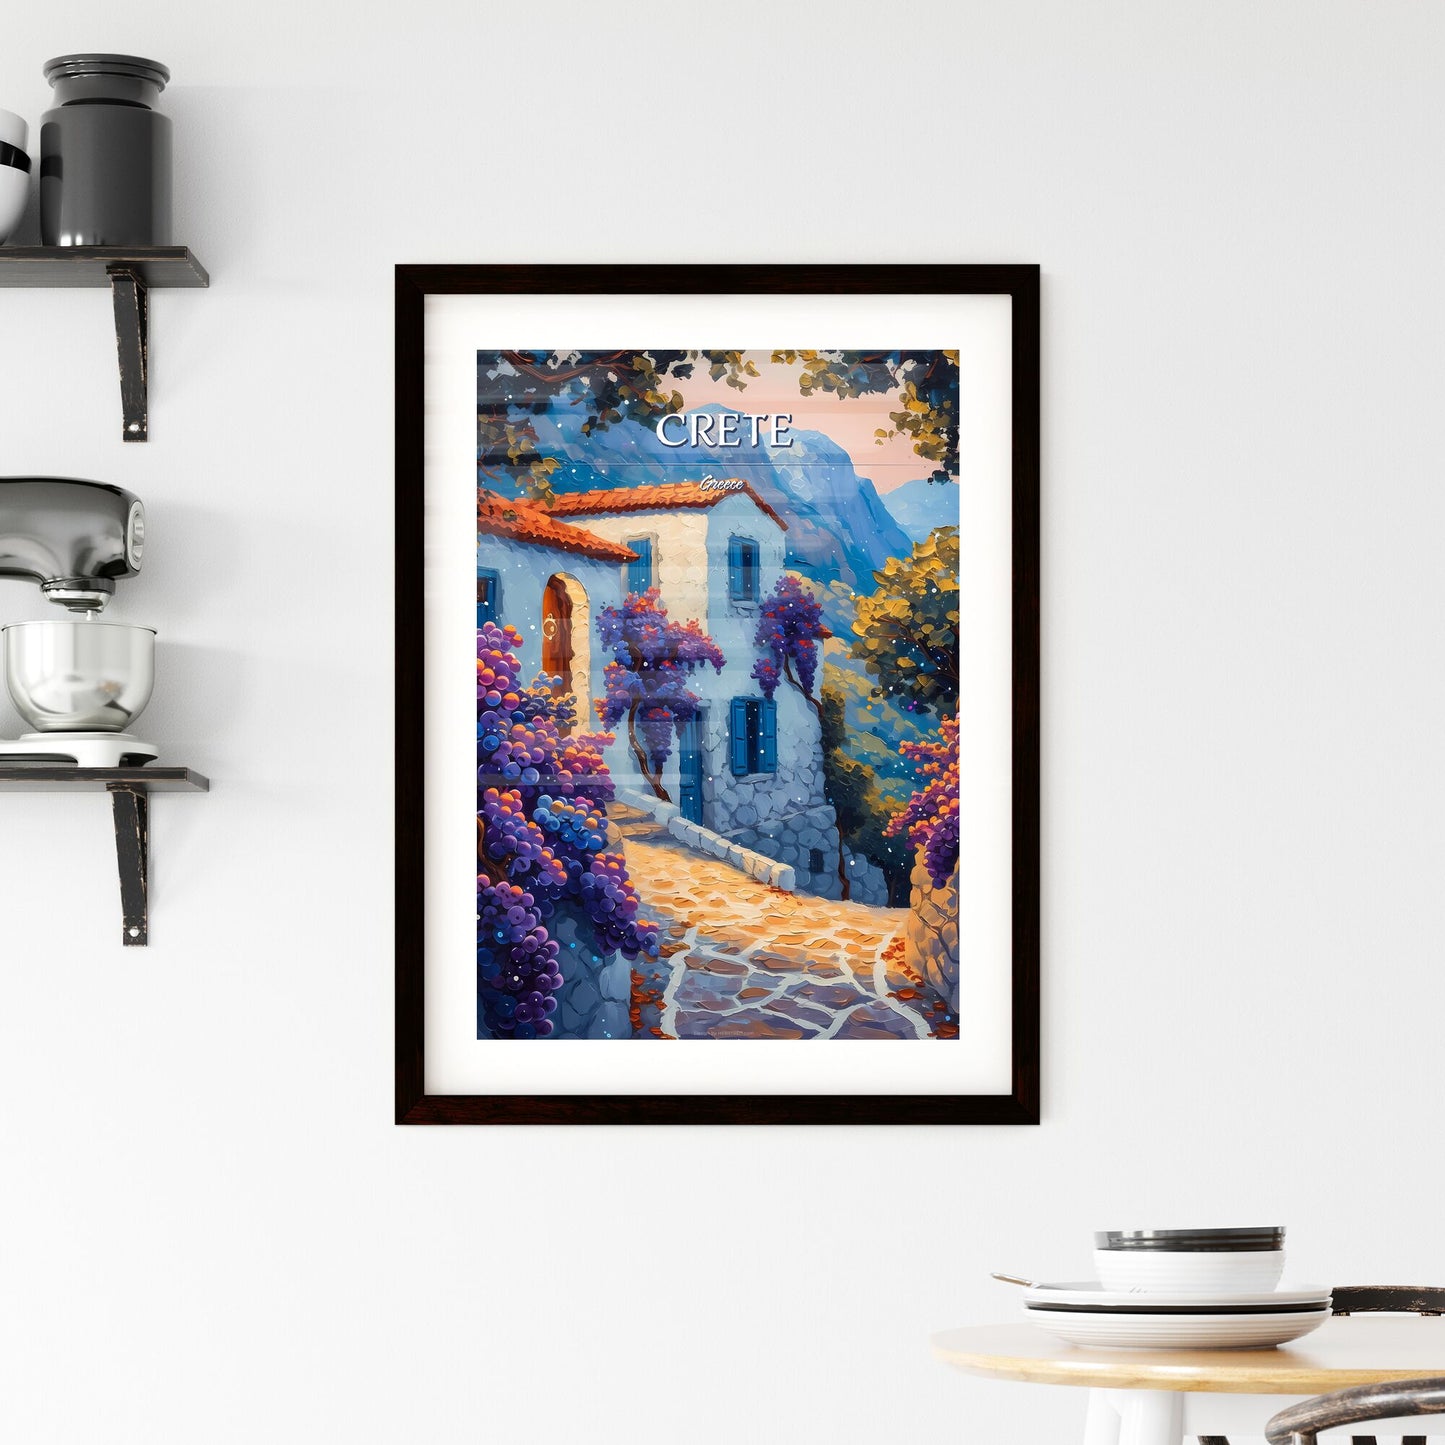 Crete, Greece - Art print of a painting of a house with purple flowers Default Title